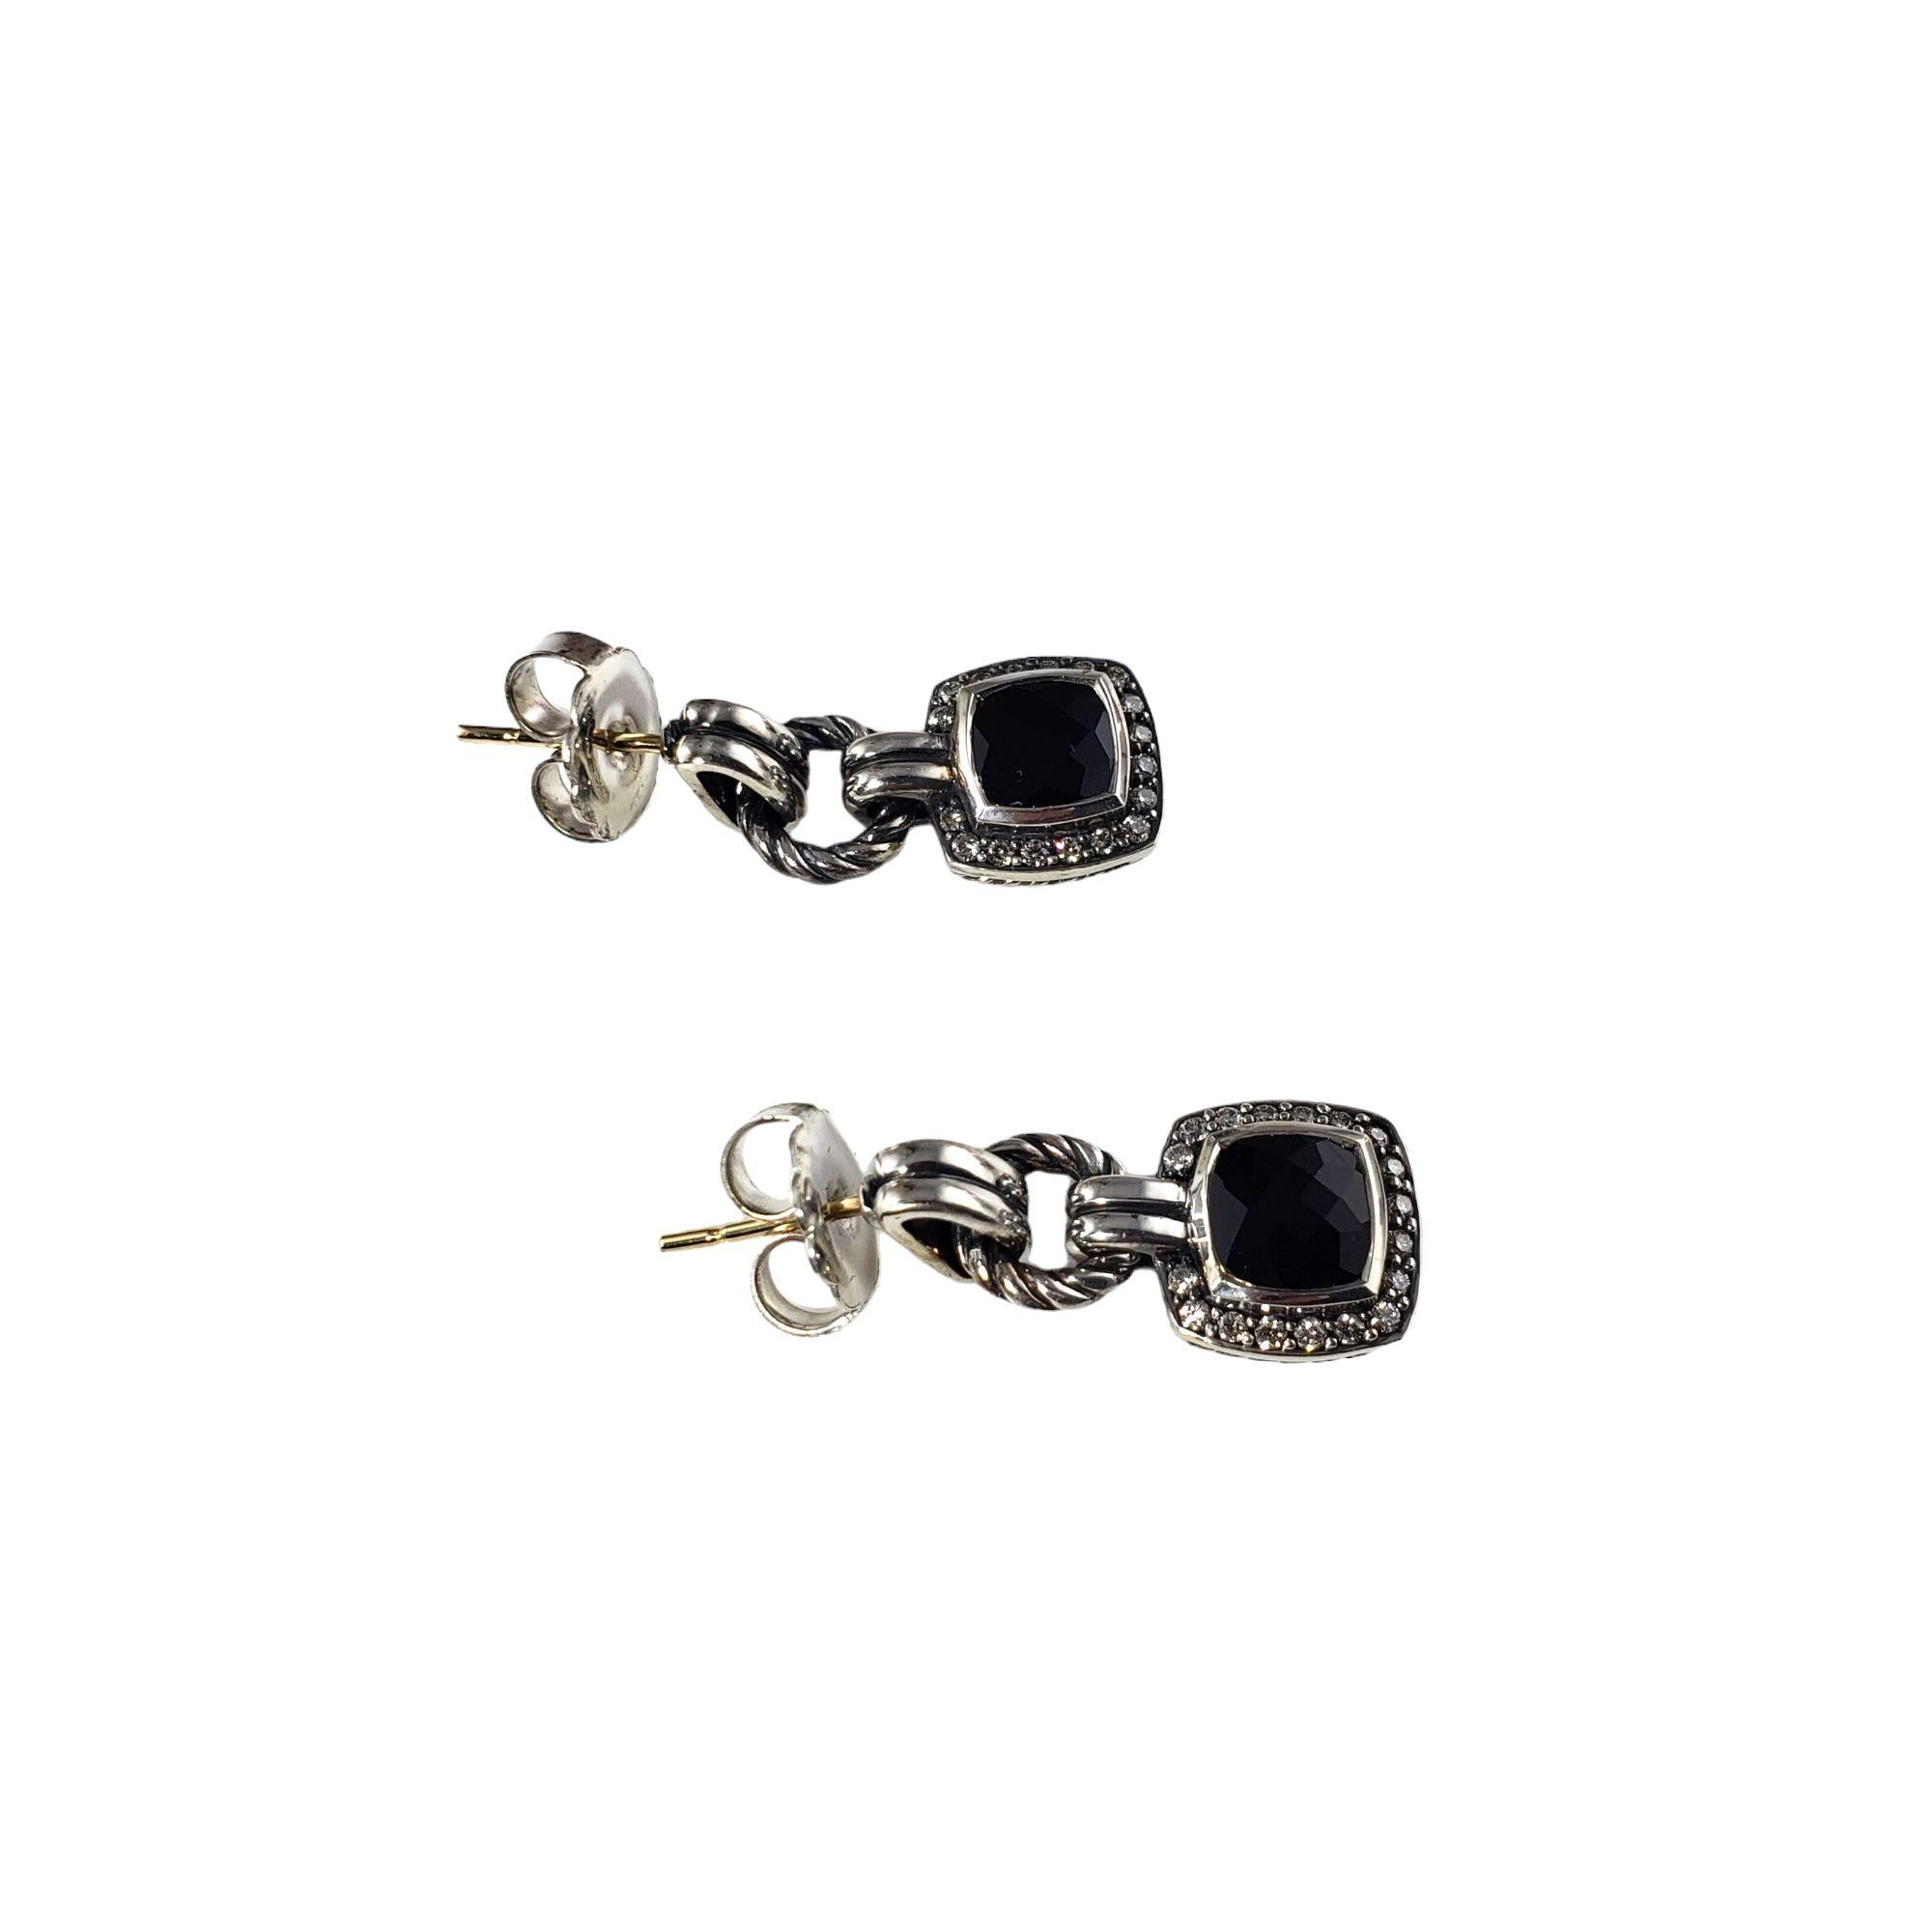 Vintage David Yurman Sterling Silver Onyx and Diamond Dangle Earrings-

These lovely David Yurman dangle earrings each feature one faceted onyx stone (6 mm x 6 mm) and 17 round brilliant cut diamonds.

* Backs are not David Yurman

Total diamond